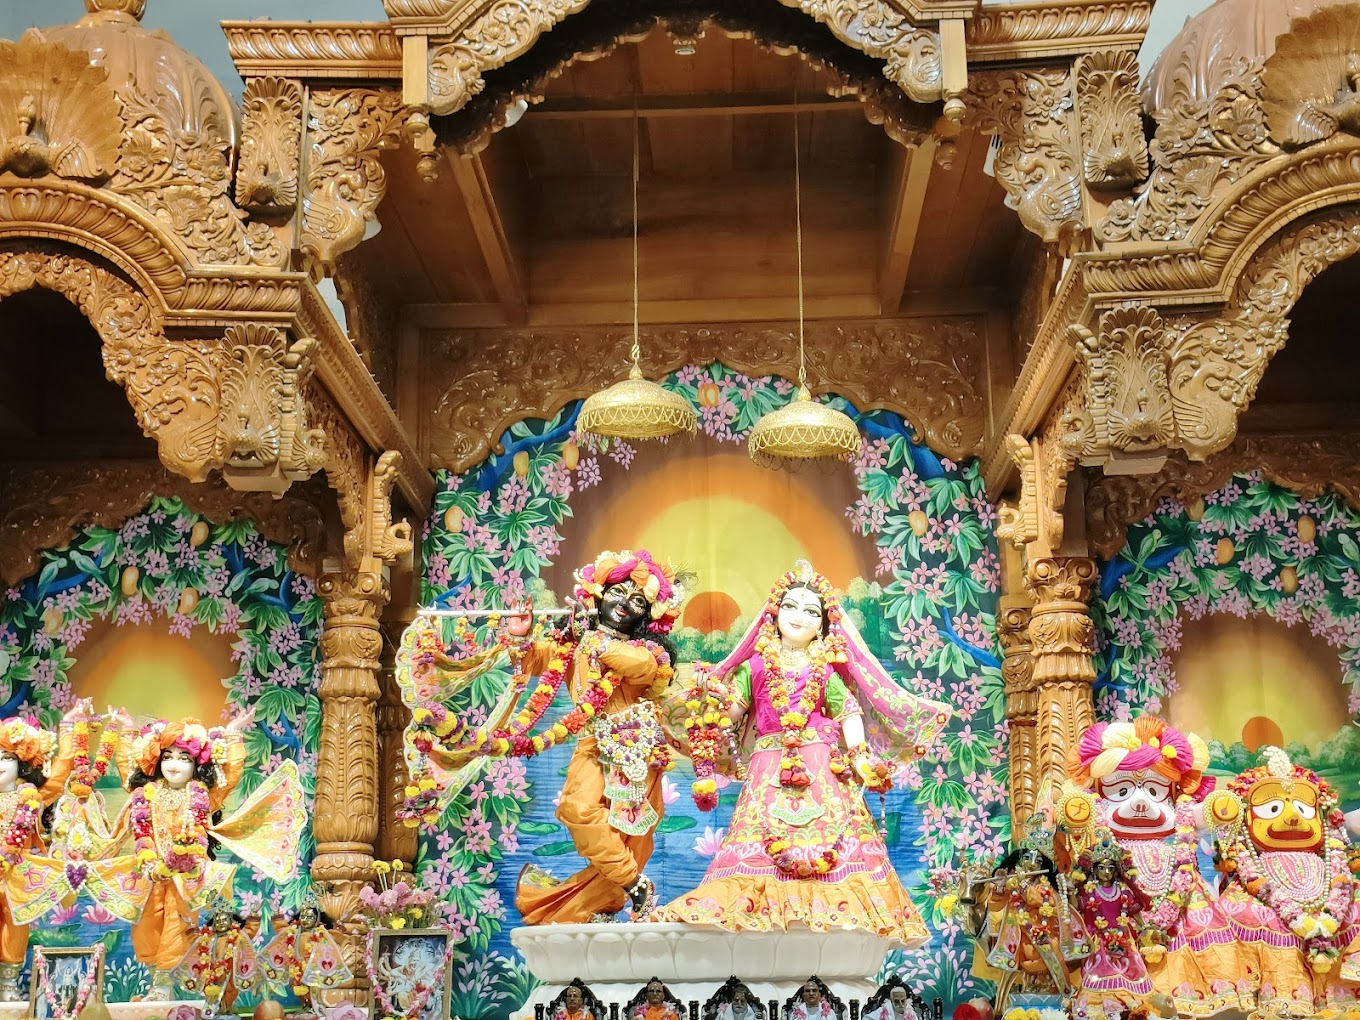 Iskcon Temple Noida Timings, Ticket Price, Nearest Metro Station, Aarti Timings, Photos, Location, and Reviews